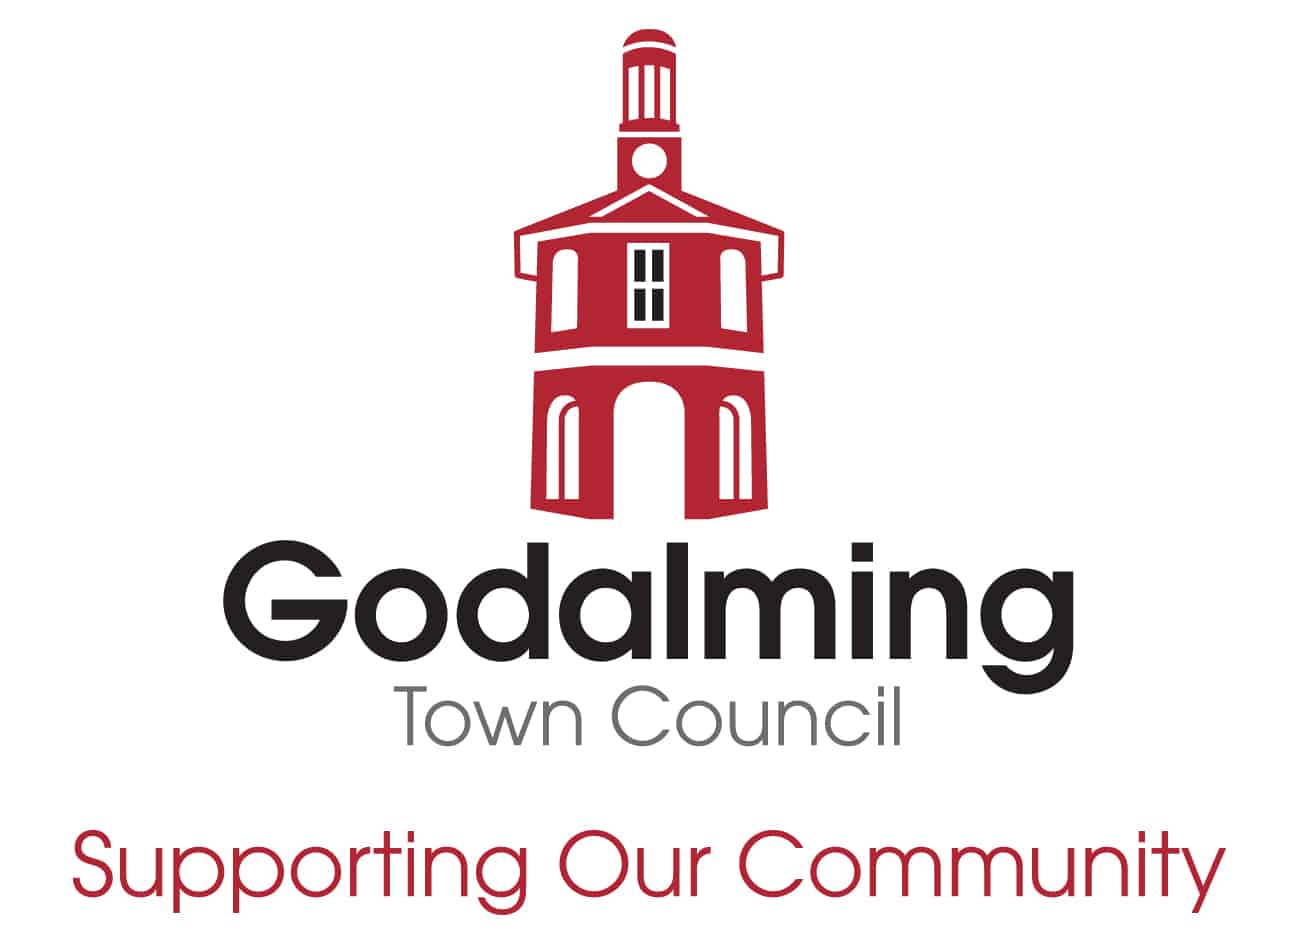 Godalming Town Council - Supporting Our Community